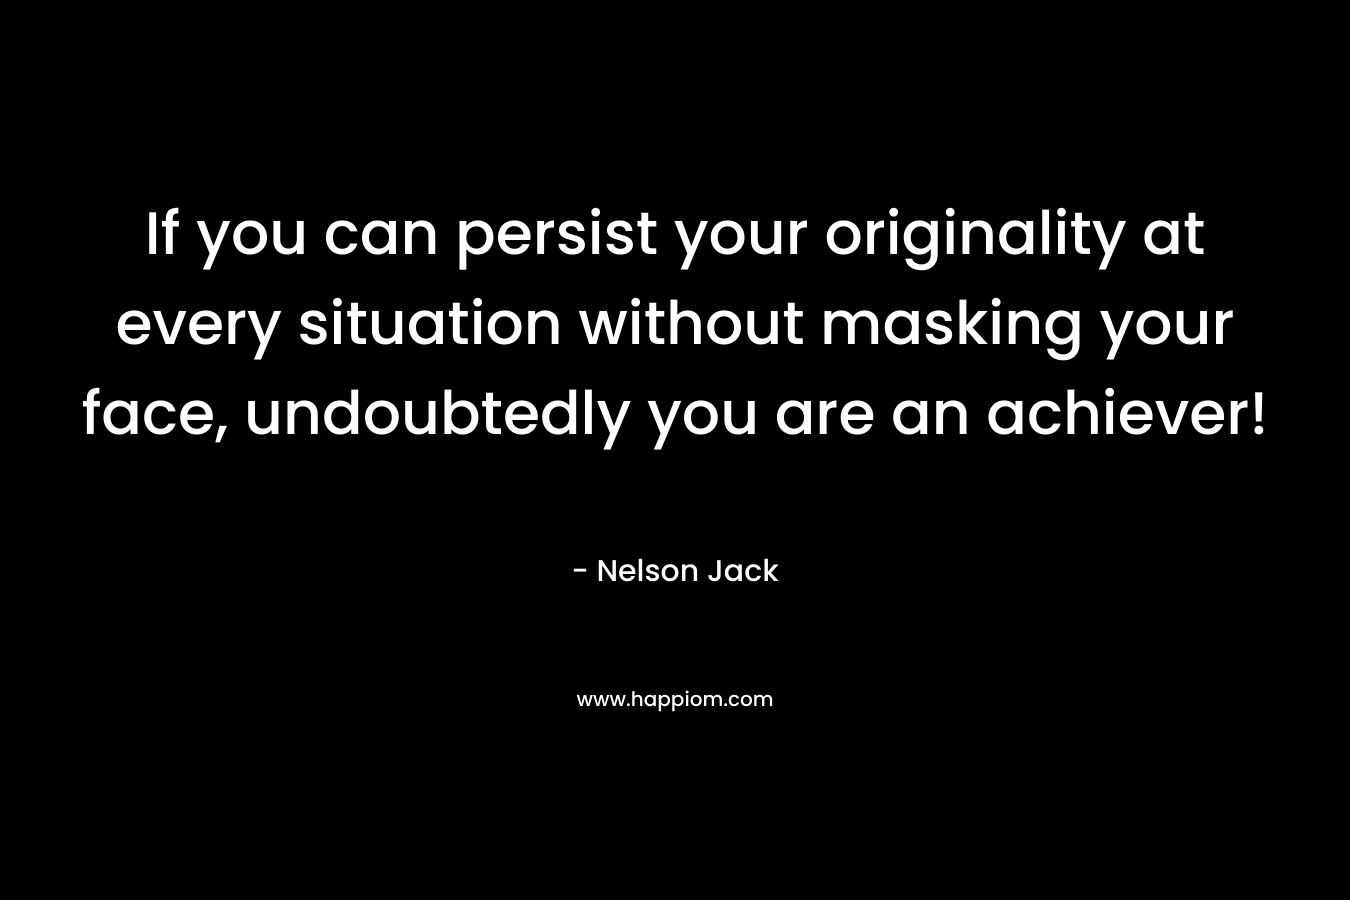 If you can persist your originality at every situation without masking your face, undoubtedly you are an achiever! – Nelson Jack